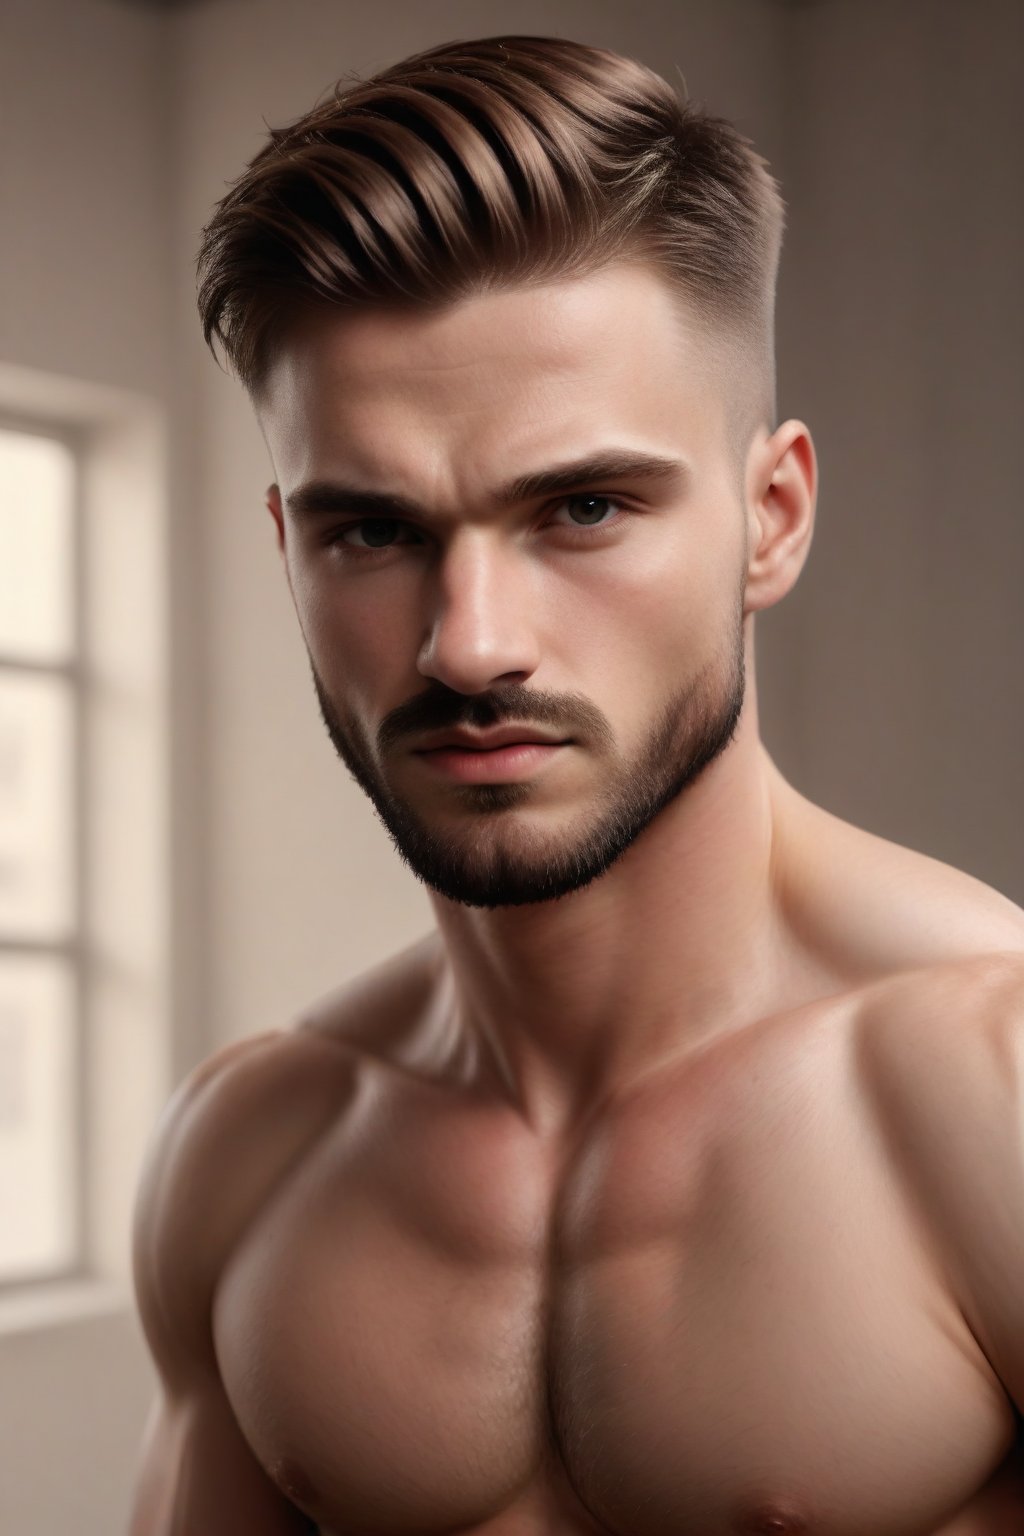 A masterpiece portrait of Jaeggernawt, a 27-year-old handsome and well-shaped man, with a smooth pale complexion and perfect features. Framed against an abstract studio background, he exudes health and joviality. His crew cut hairstyle and brow facial hair add to his masculine charm. Shot indoors with intense softglow, the image is rendered in high-resolution 8K clarity, showcasing every detail. Captured with a EOS Mark V camera and 65mm lens, this award-winning portrait presents Jaeggernawt in a bright matte colored glory.